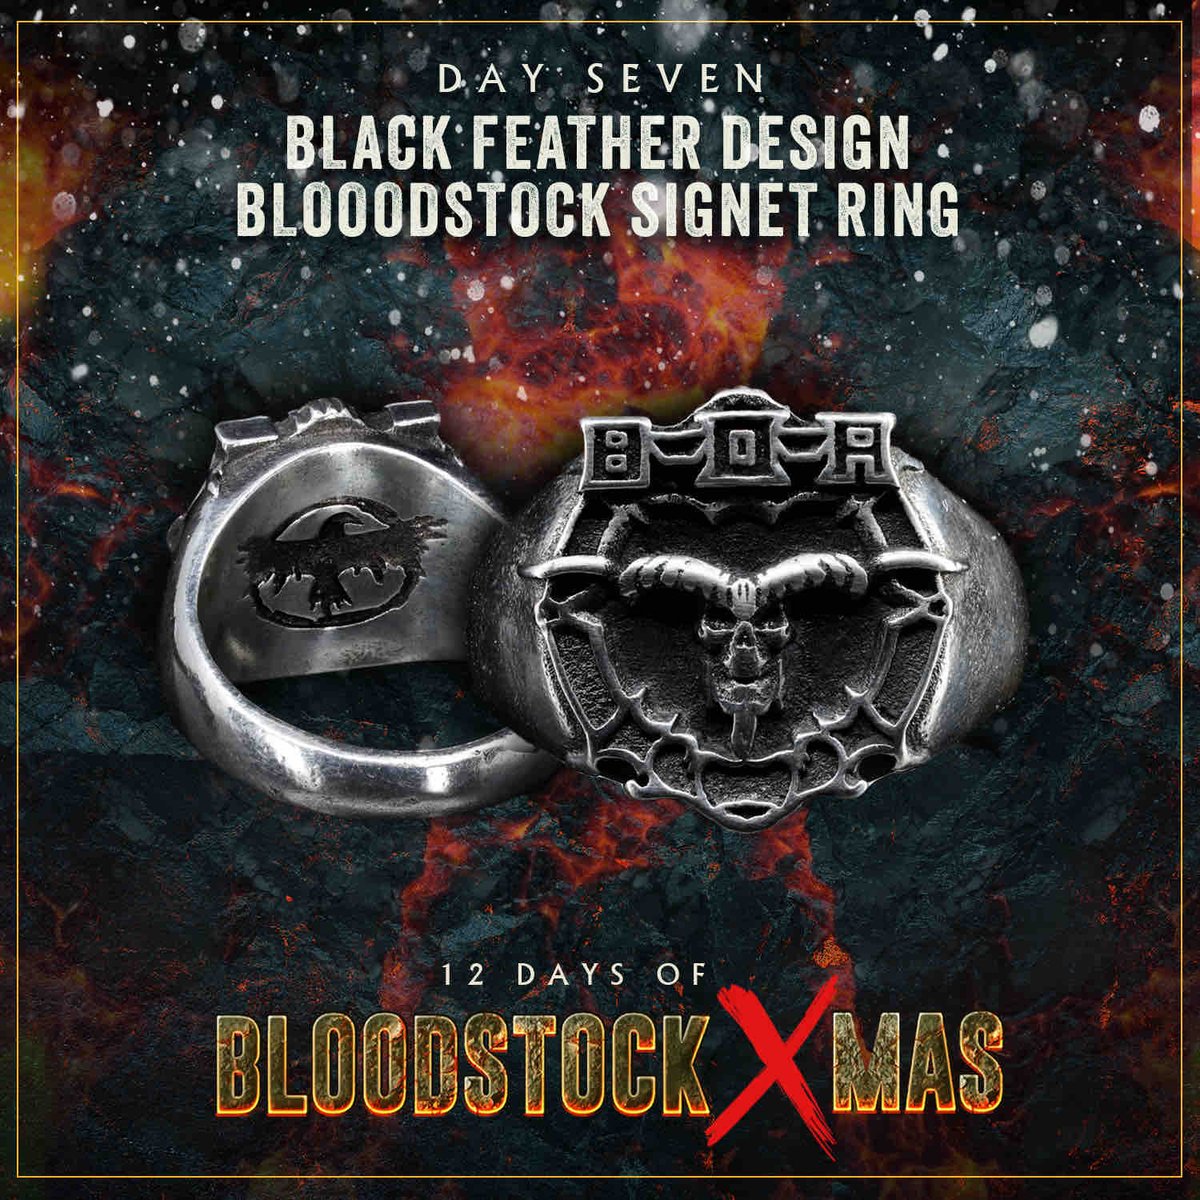 🎅ON THE SEVENTH DAY OF CHRISTMAS BLOODSTOCK GAVE TO ME 🎁… An official Black Feather Design Bloodstock signet ring! To be in with a chance of winning head over to the Bloodstock Instagram instagram.com/bloodstockopen…